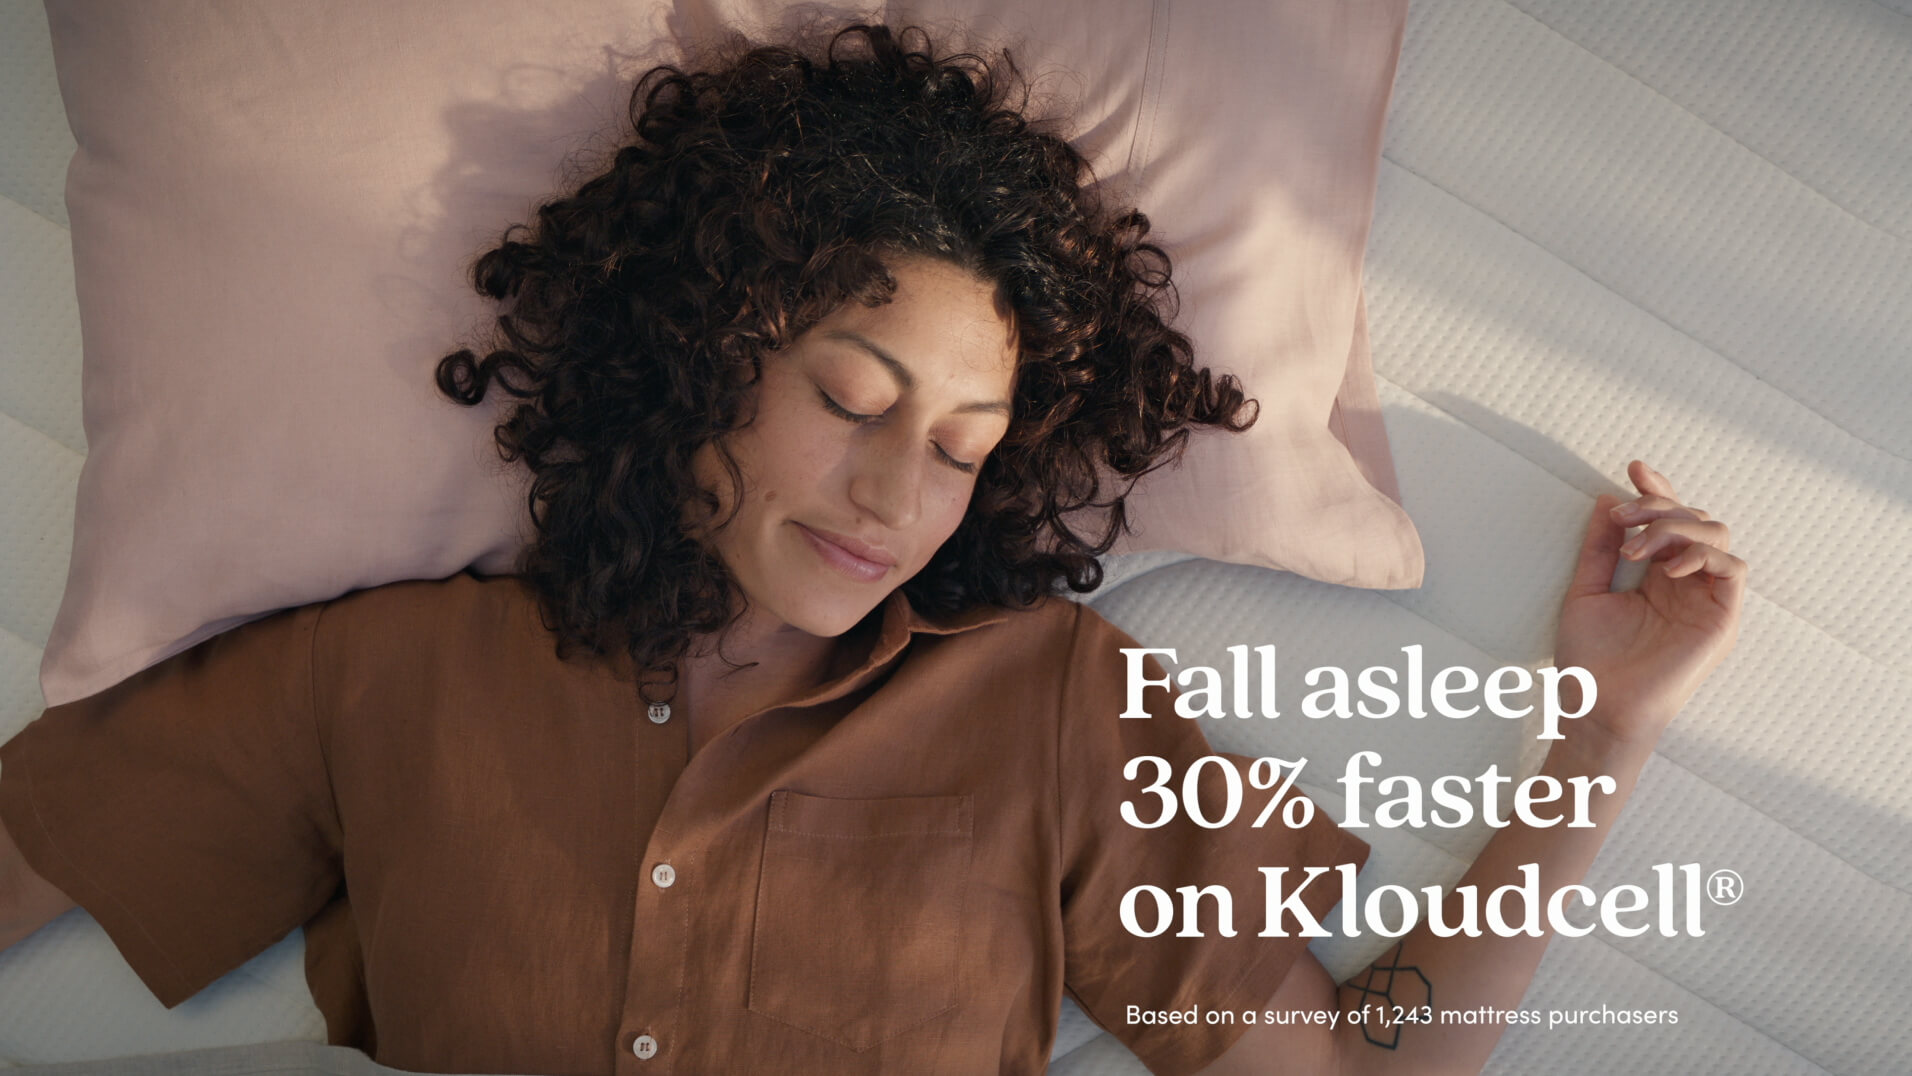 Koala Kloudcell television campaign commercial showing woman laying on bed sleeping peacefully with text saying fall asleep 30% faster on Kloudcell